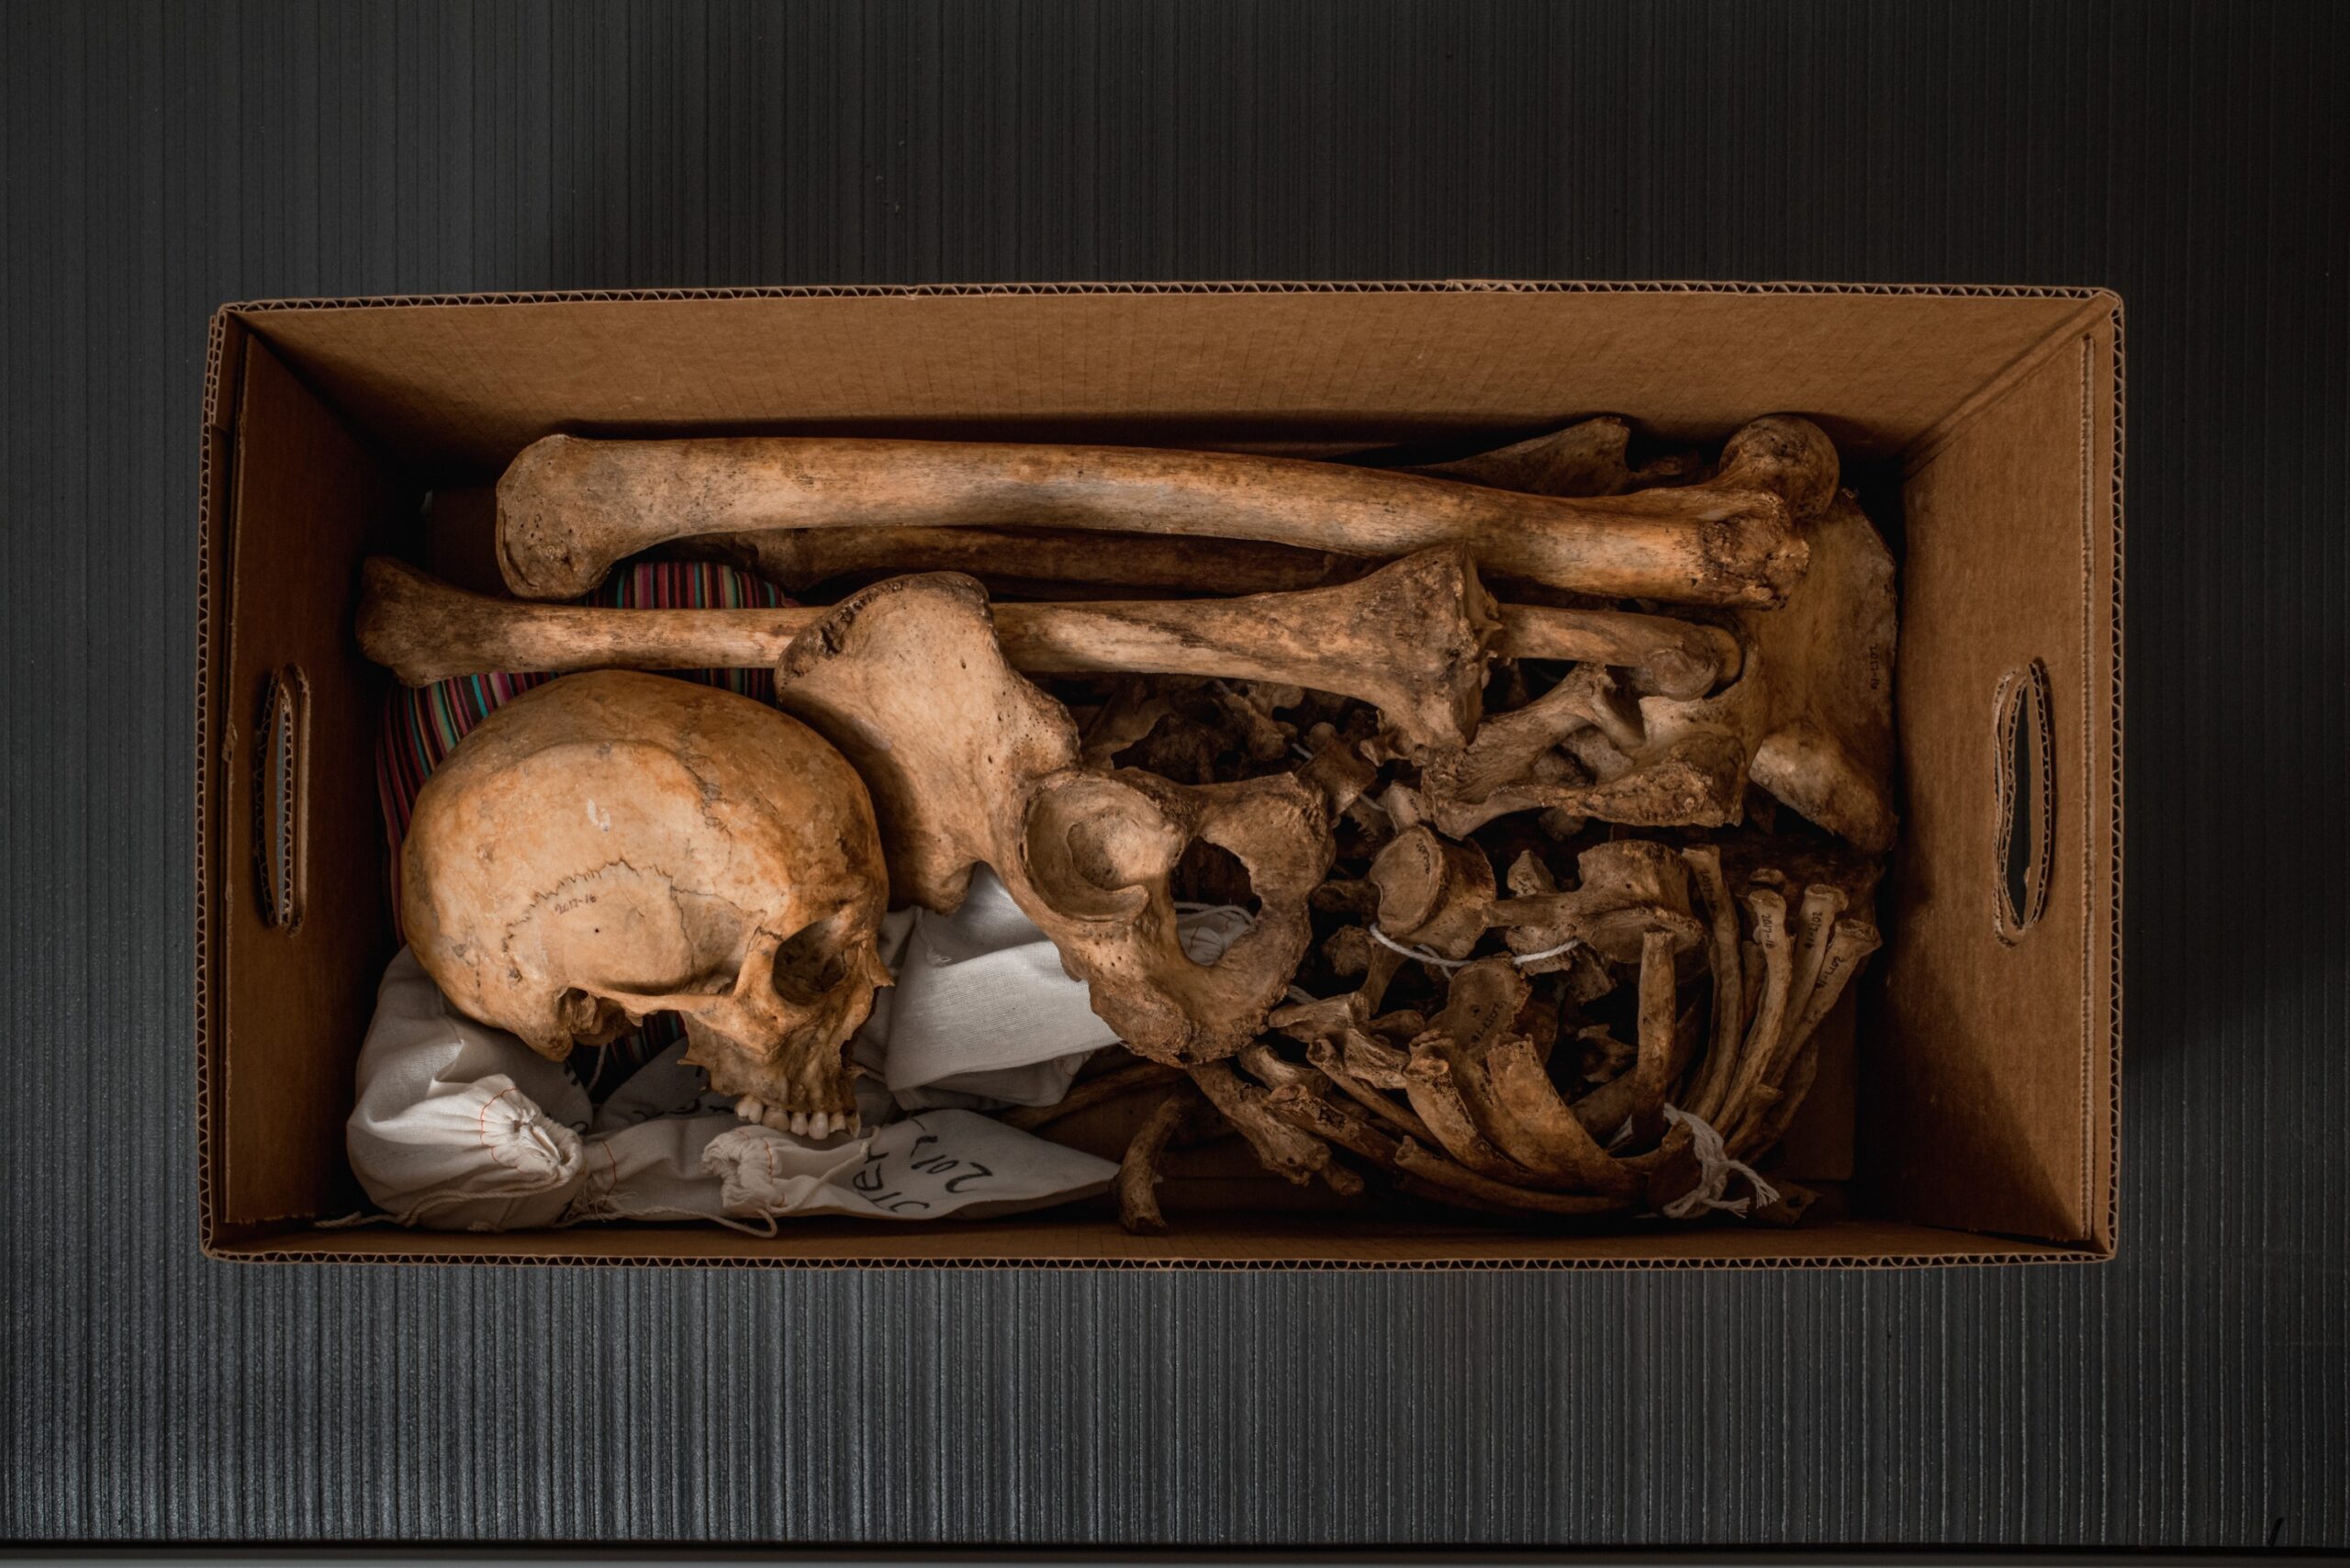 a view into a cardboard box containing complete human remains